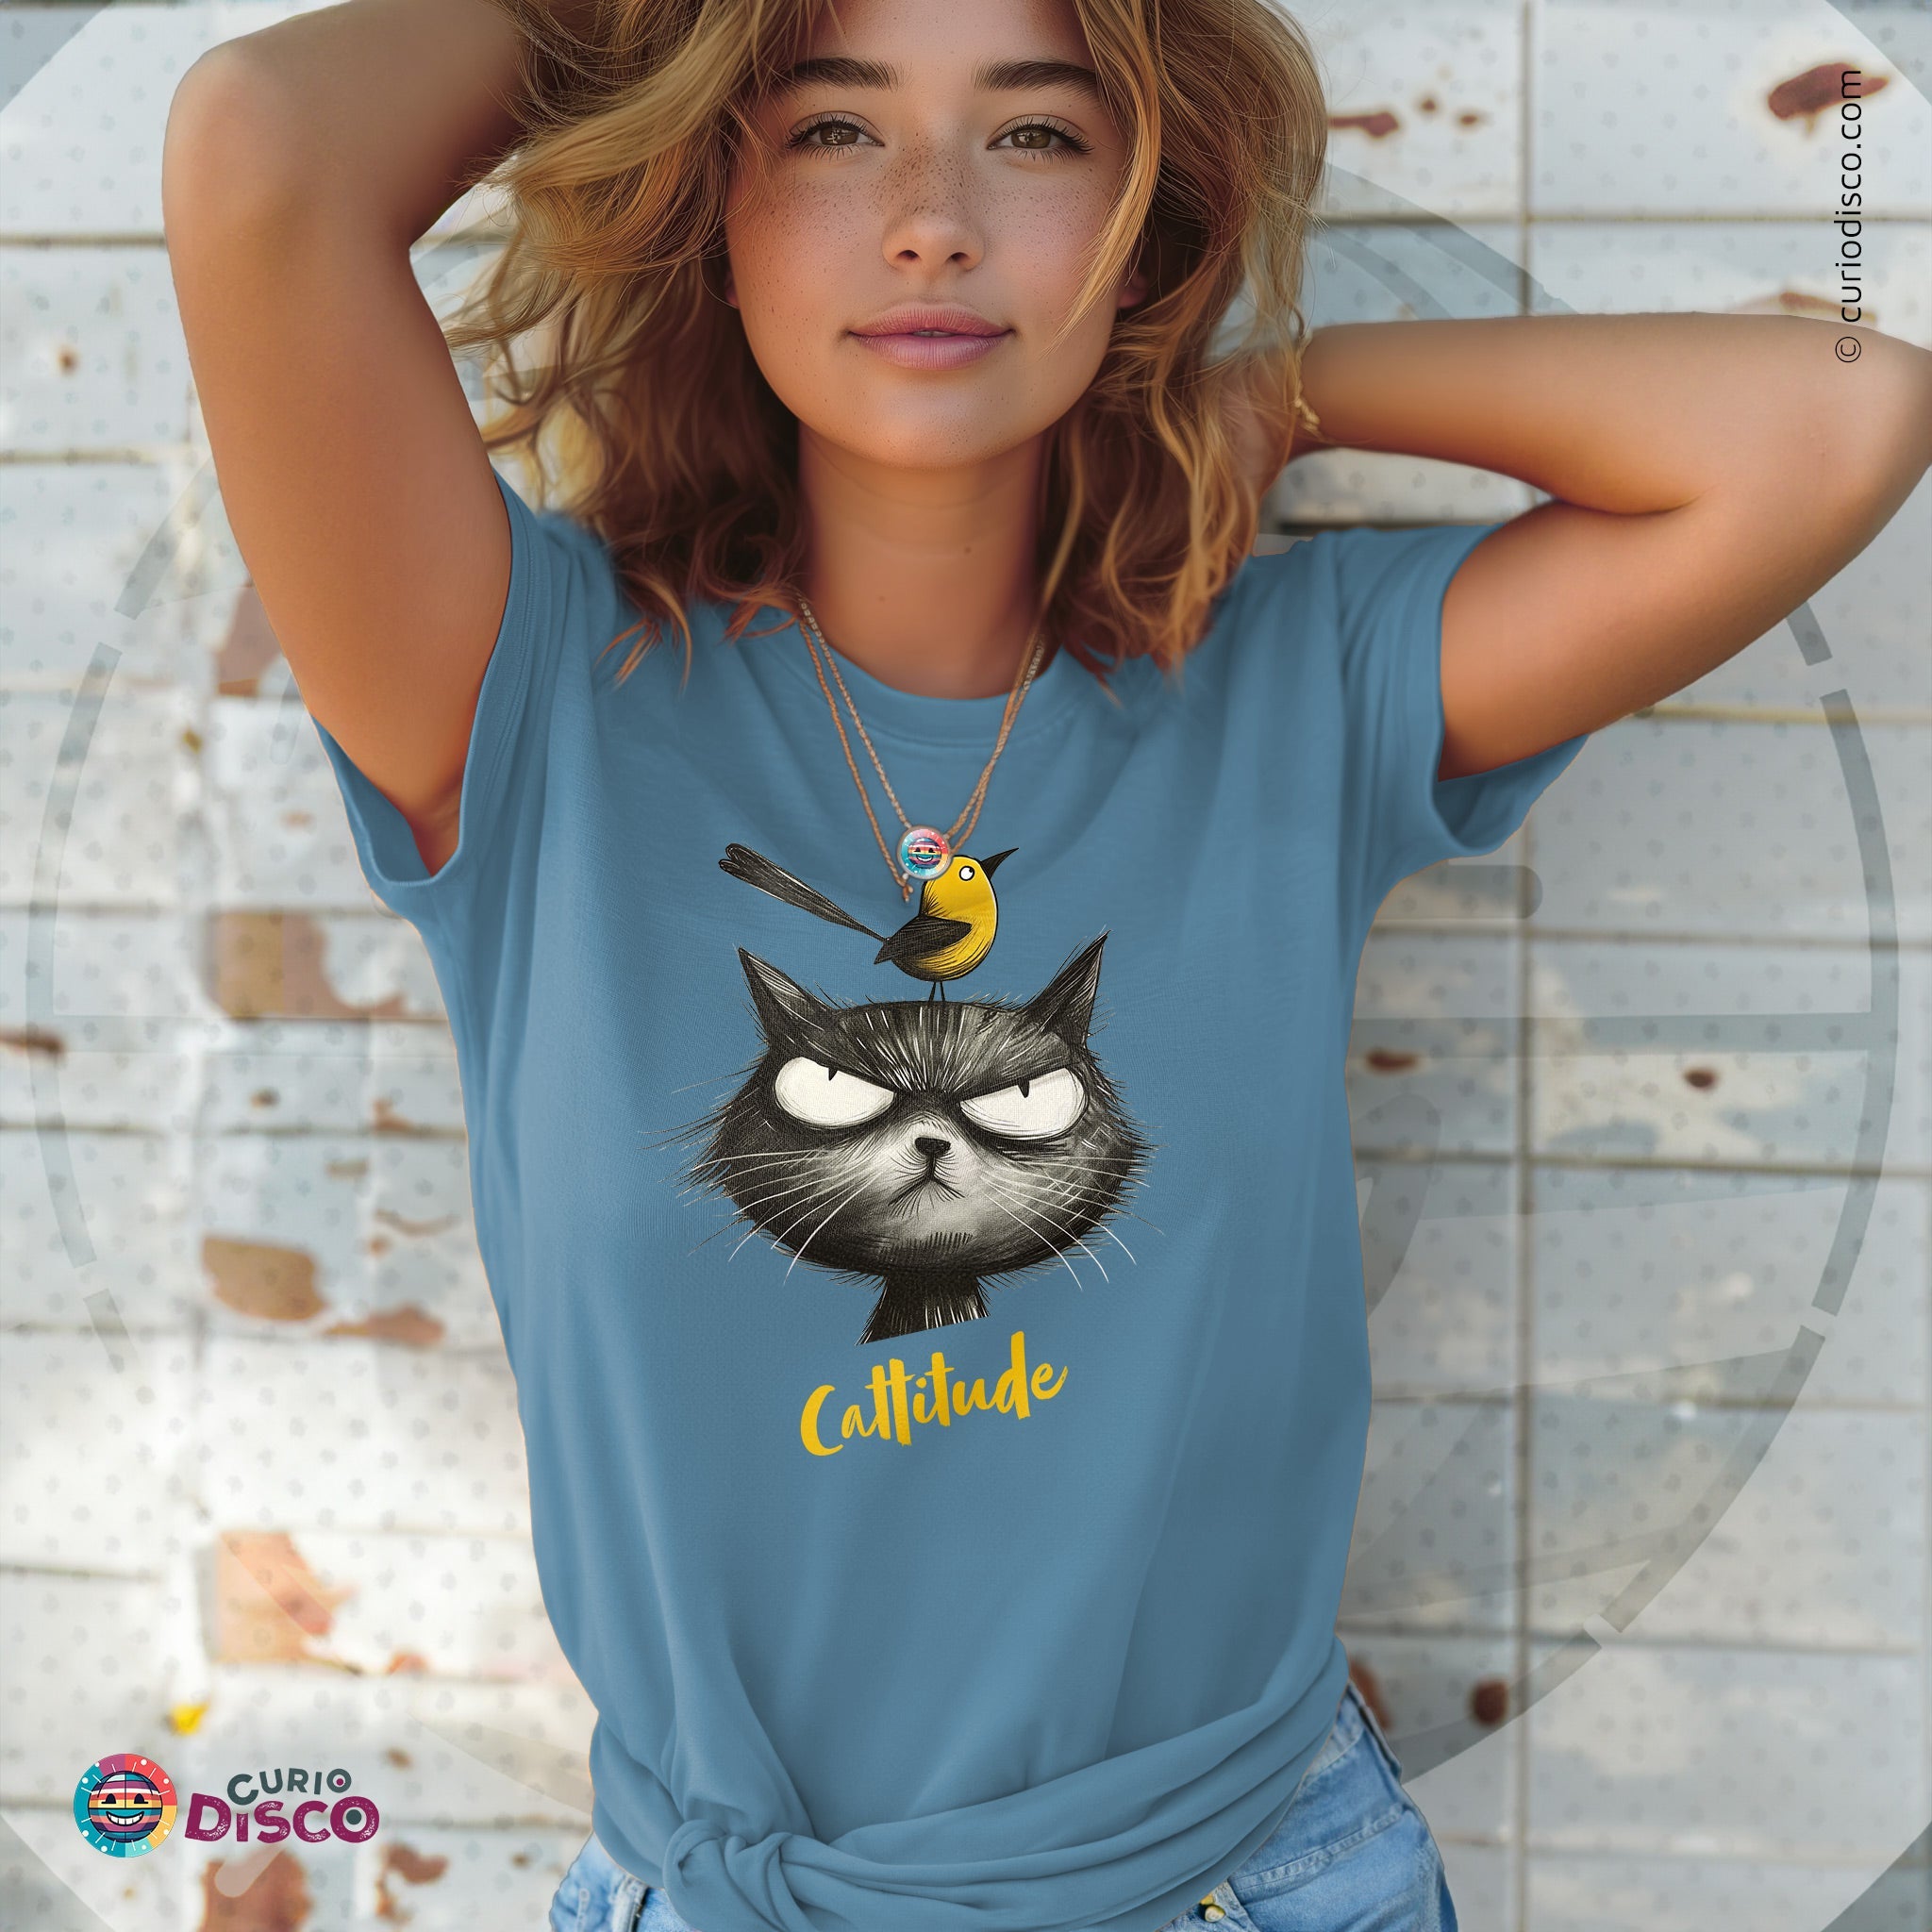 Steel blue, short sleeve t-shirt, a funny cat shirt and ironic shirt blend, great as gifts for girlfriend, cat lover gift, and meme shirt. Cat yoga, treat yourself, gifts for cat lovers and cat people. Custom pet shirt in plus size.